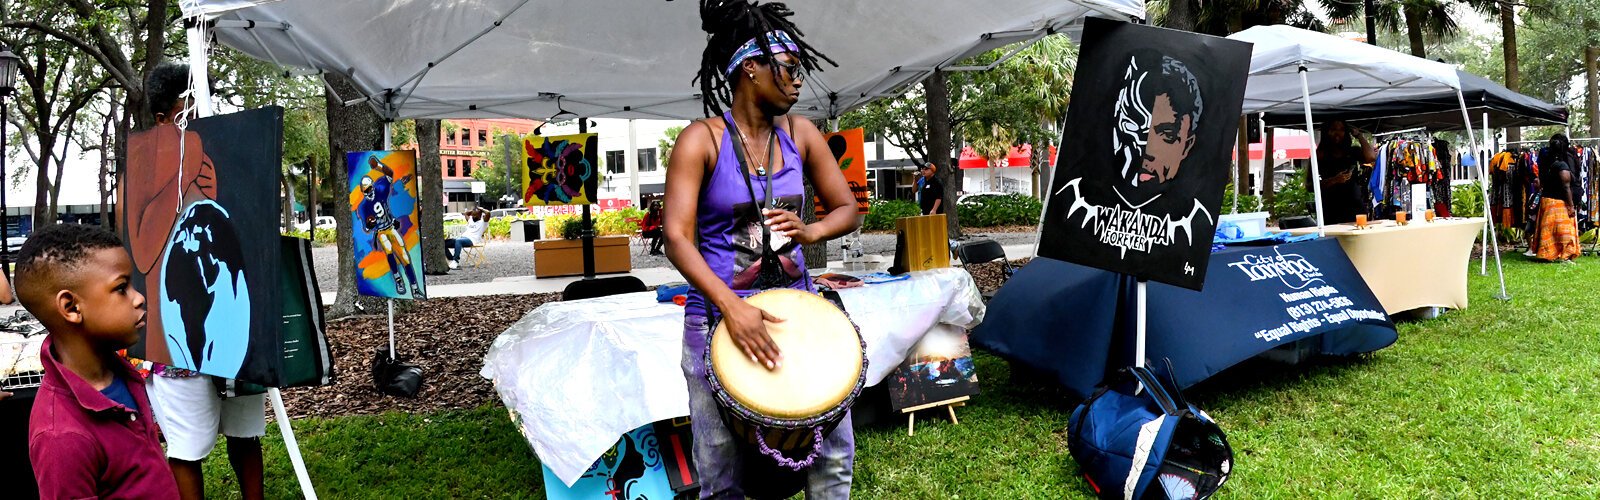 Performance artist Lakeema Matthew entertains festival goers at Tampa's Juneteenth celebration with her drumming, encouraging others to find their purpose and live a life with no regrets.